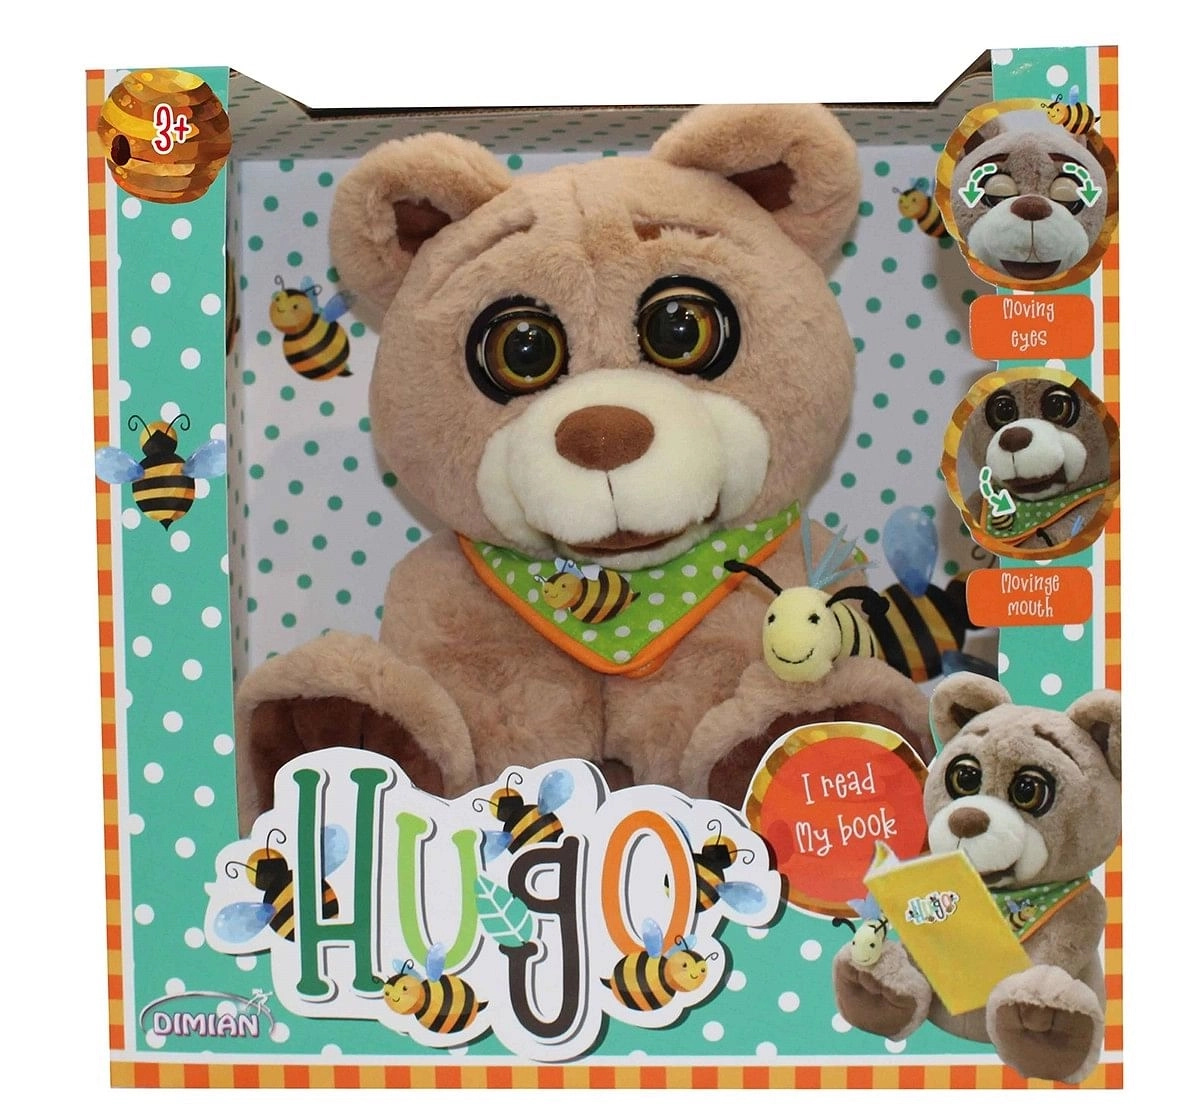 Dimian Hugo Bear Story Telling Interactive Soft Toy for Kids age 3Y+ - 42 Cm (Brown)